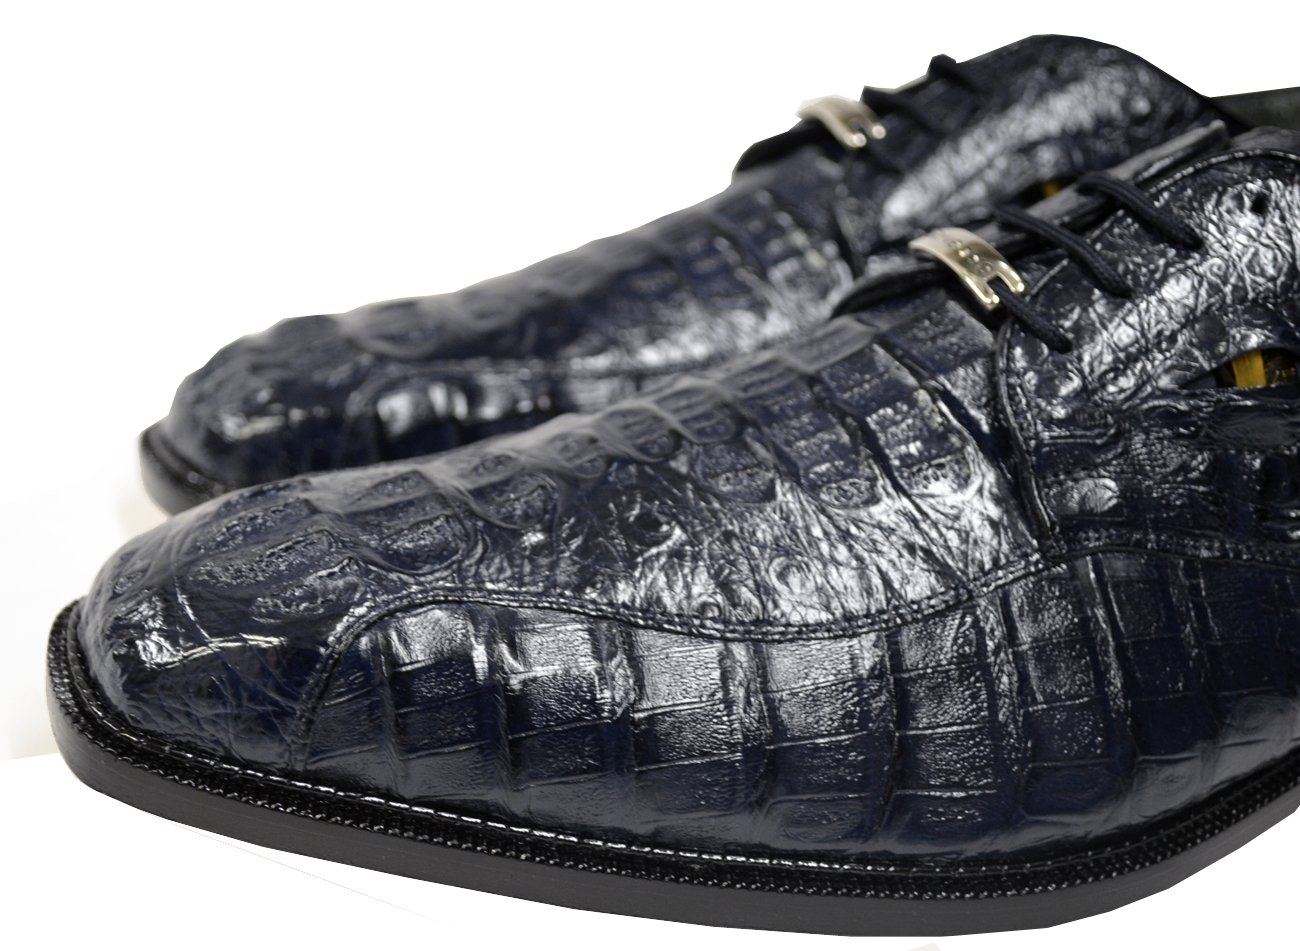 Belvedere "T-Rex" Navy Blue Hornback Crocodile Shoes With Eyes